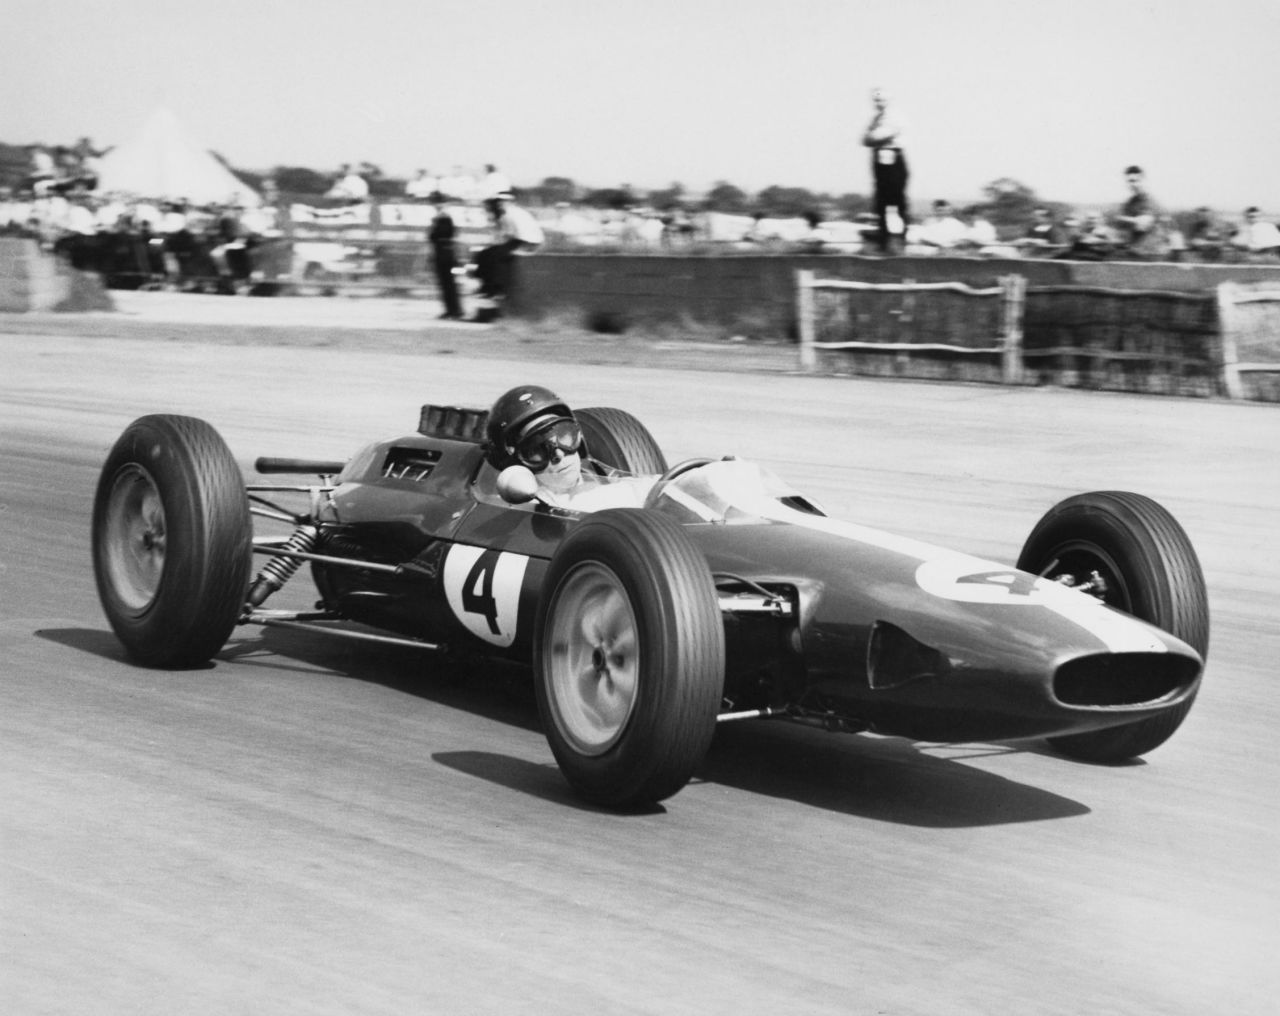 Introduced halfway through 1962, the Lotus 25 revolutionized racing car construction with the "monocoque" chassis. 